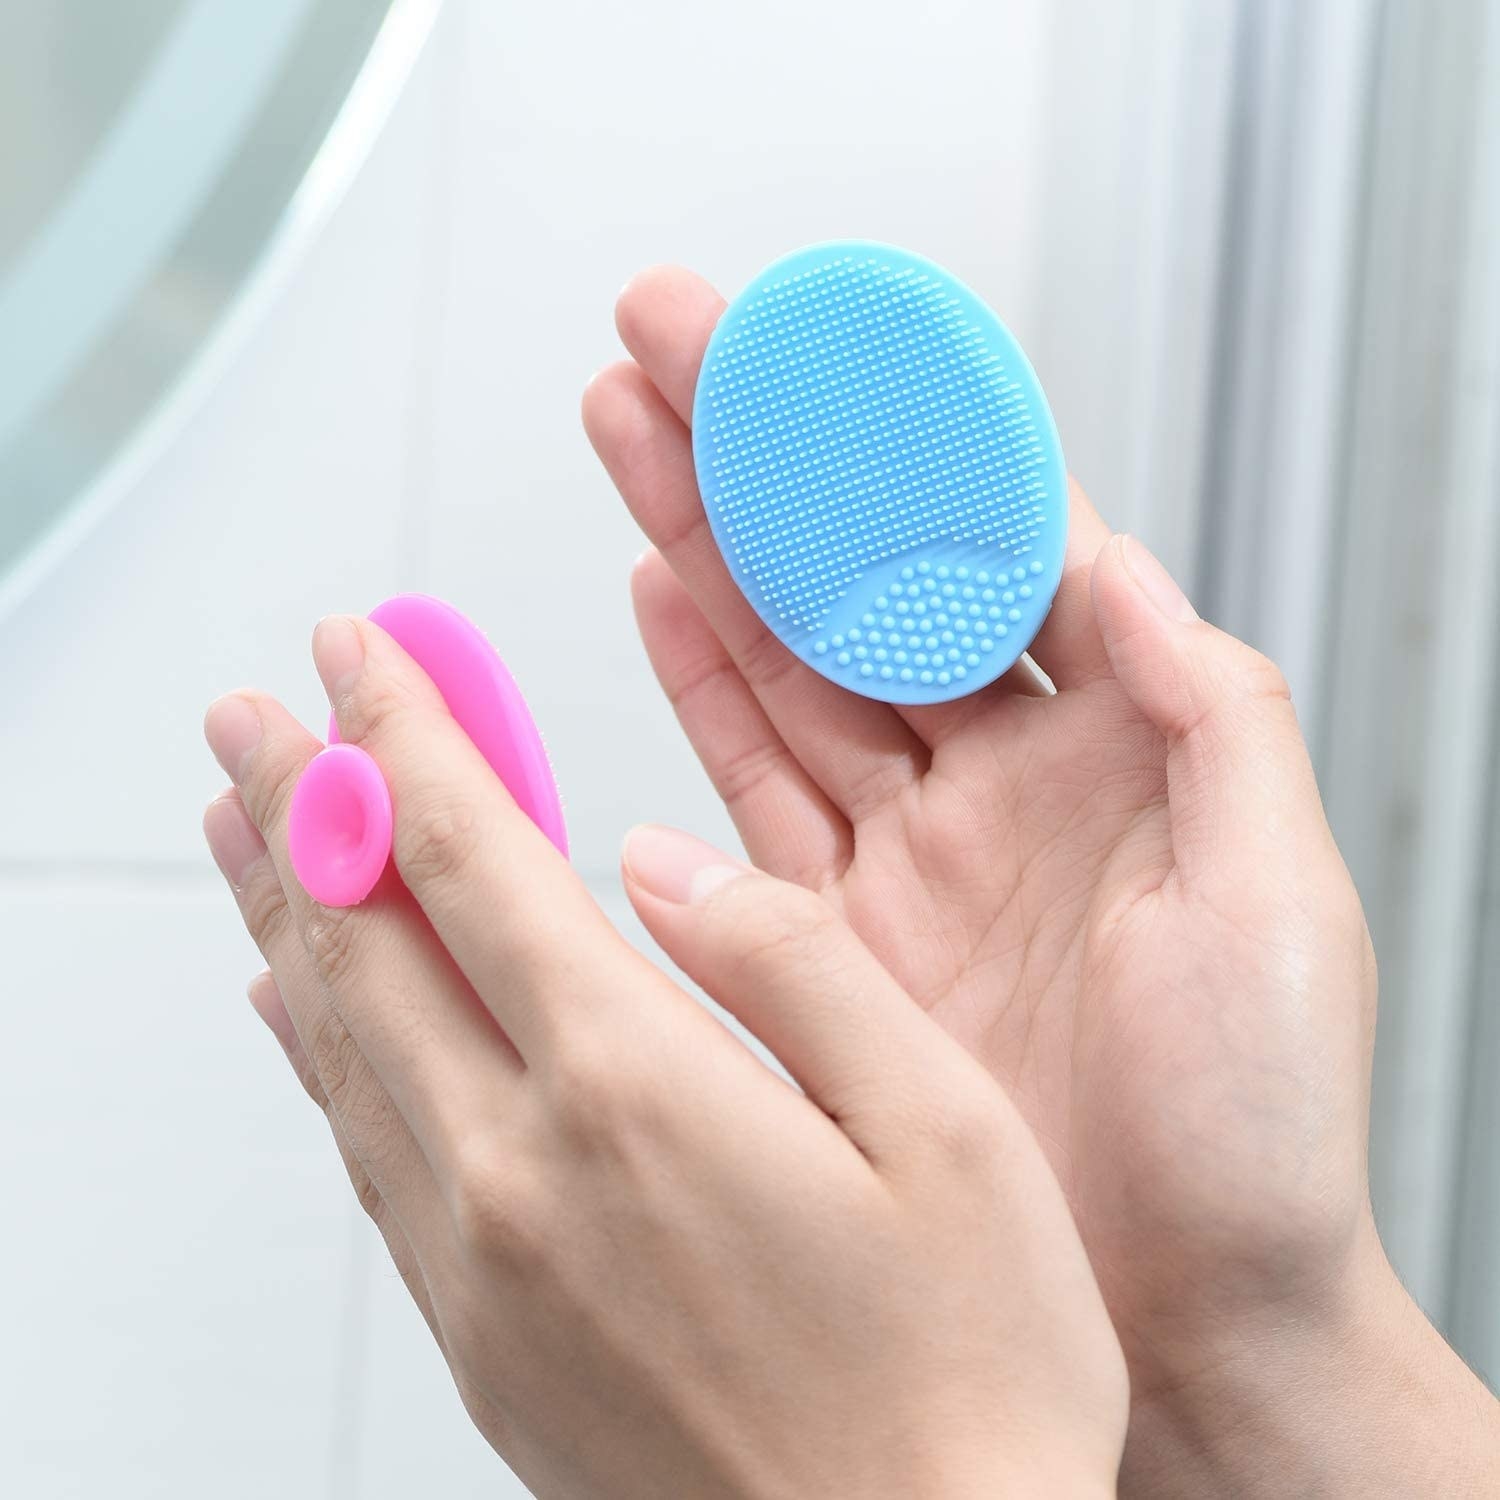 Someone holding two silicone scrubbers, one in each hand